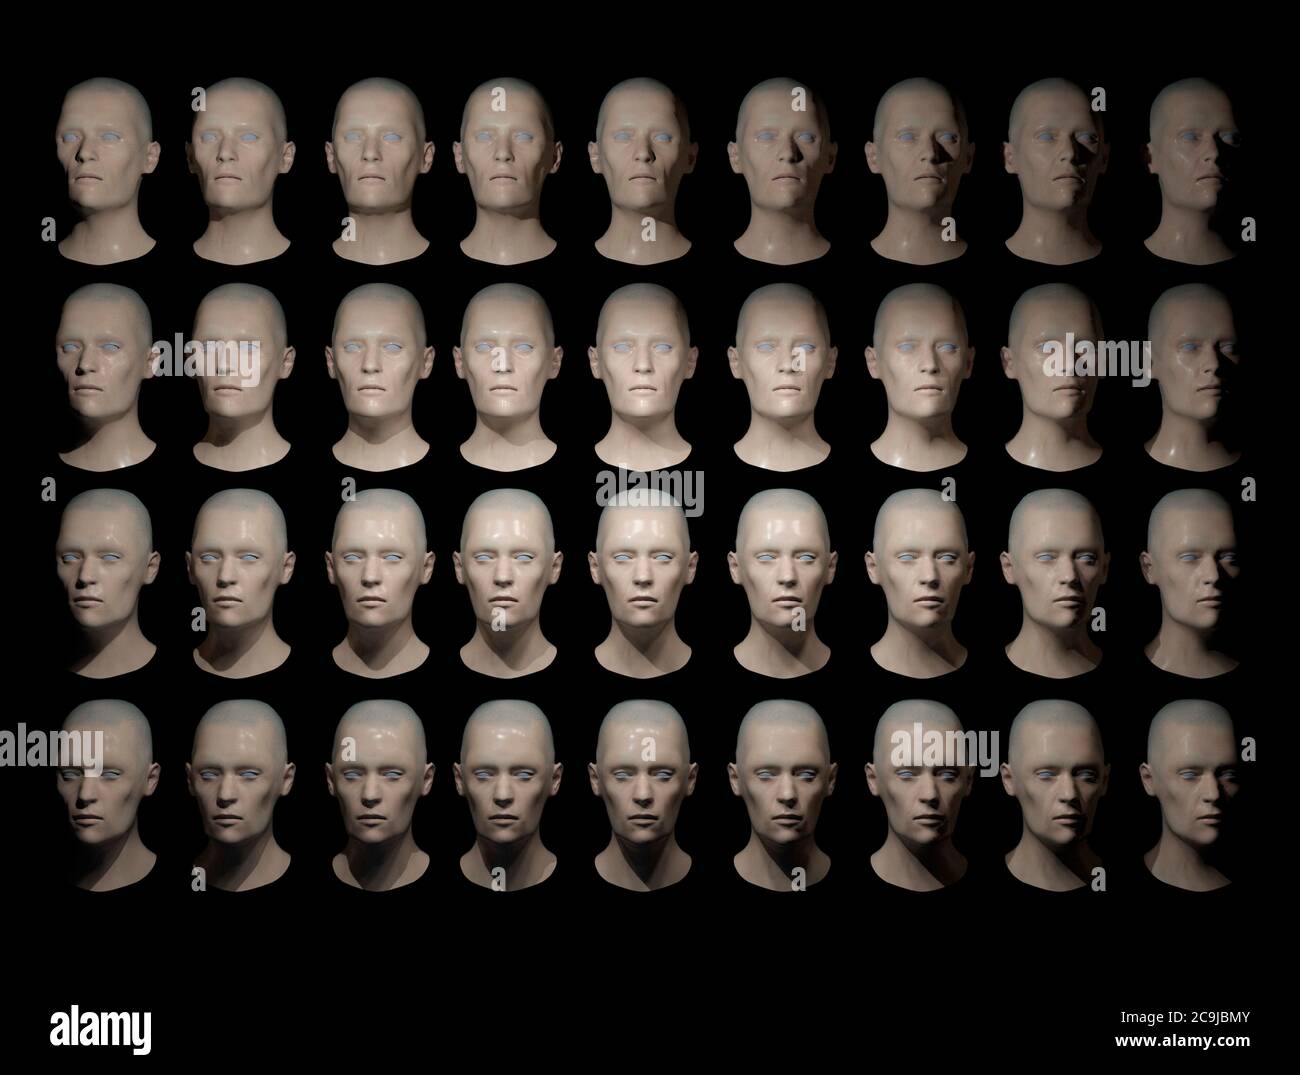 36 identical heads. Could be replacement body parts grown in lab or manufactured for robotics. Computer generated image. Stock Photo